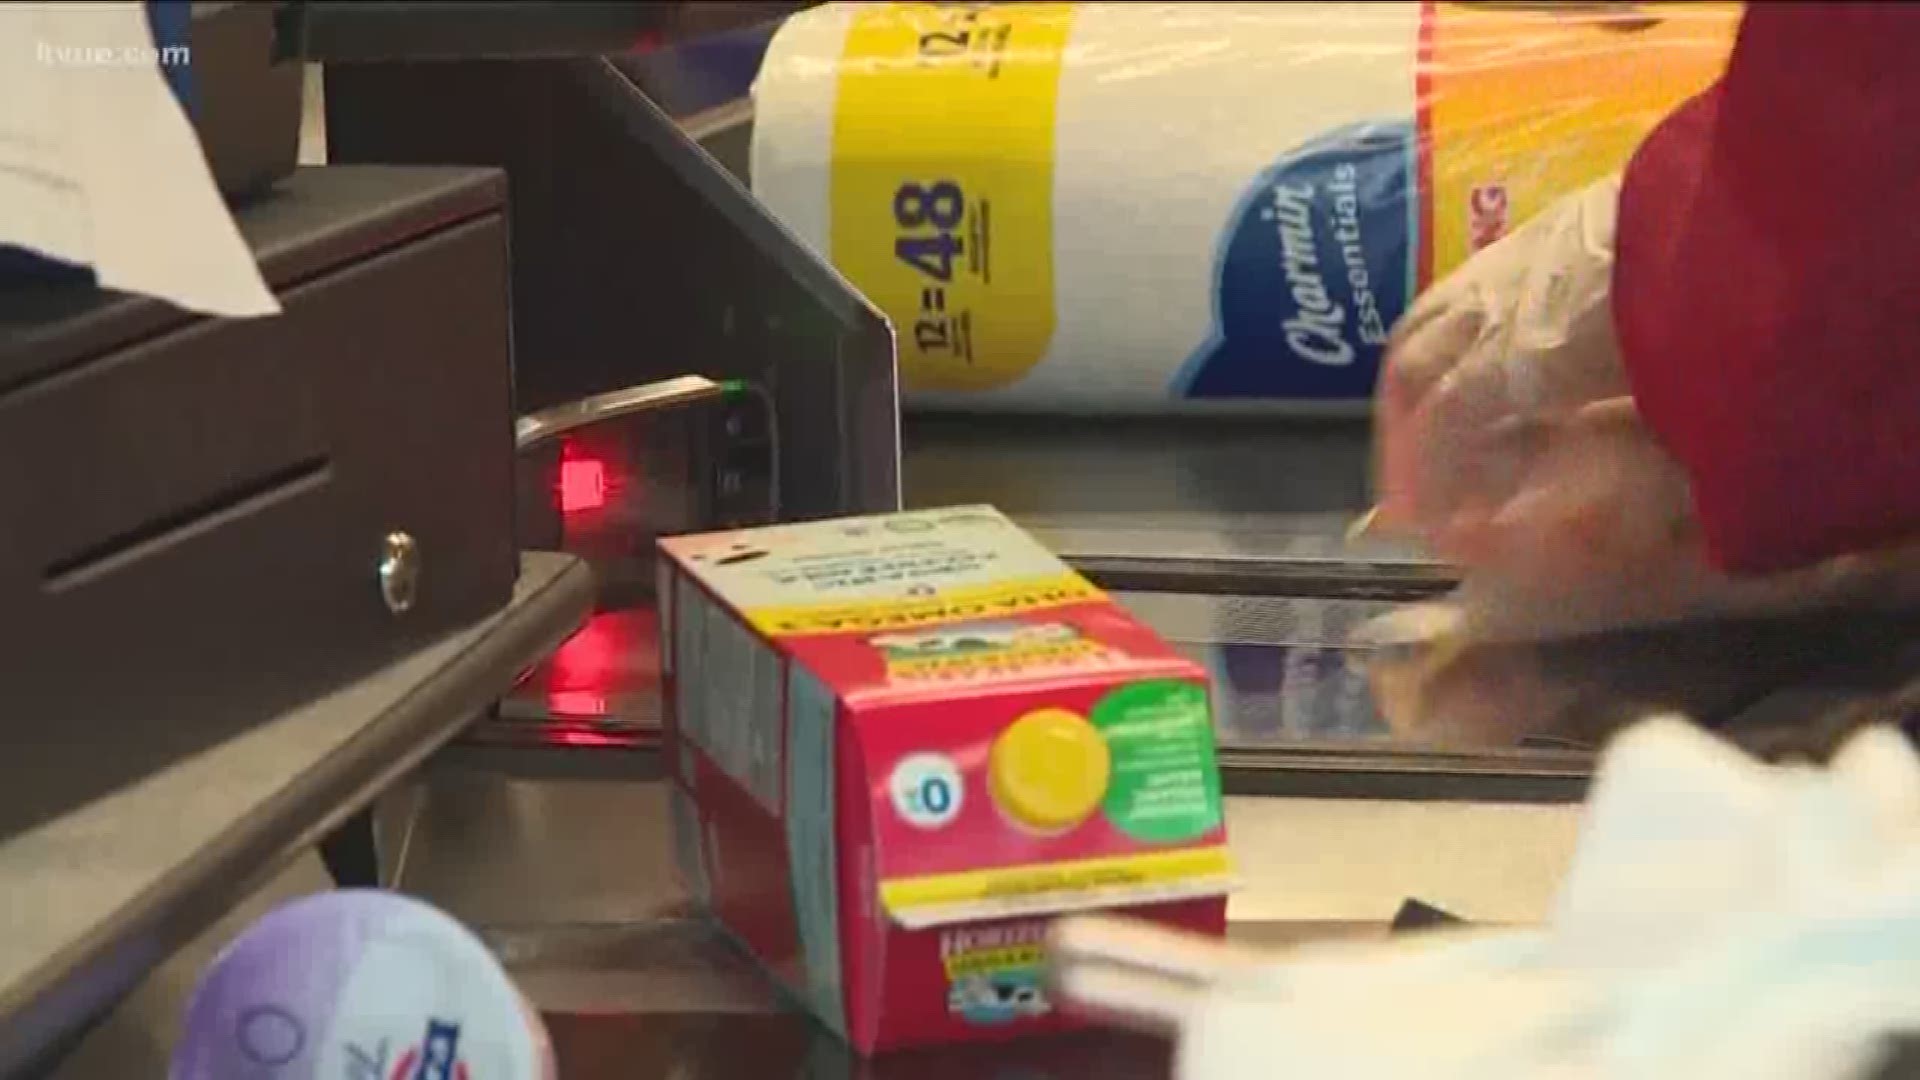 Texans can buy some items tax-free from April 25 to April 27.